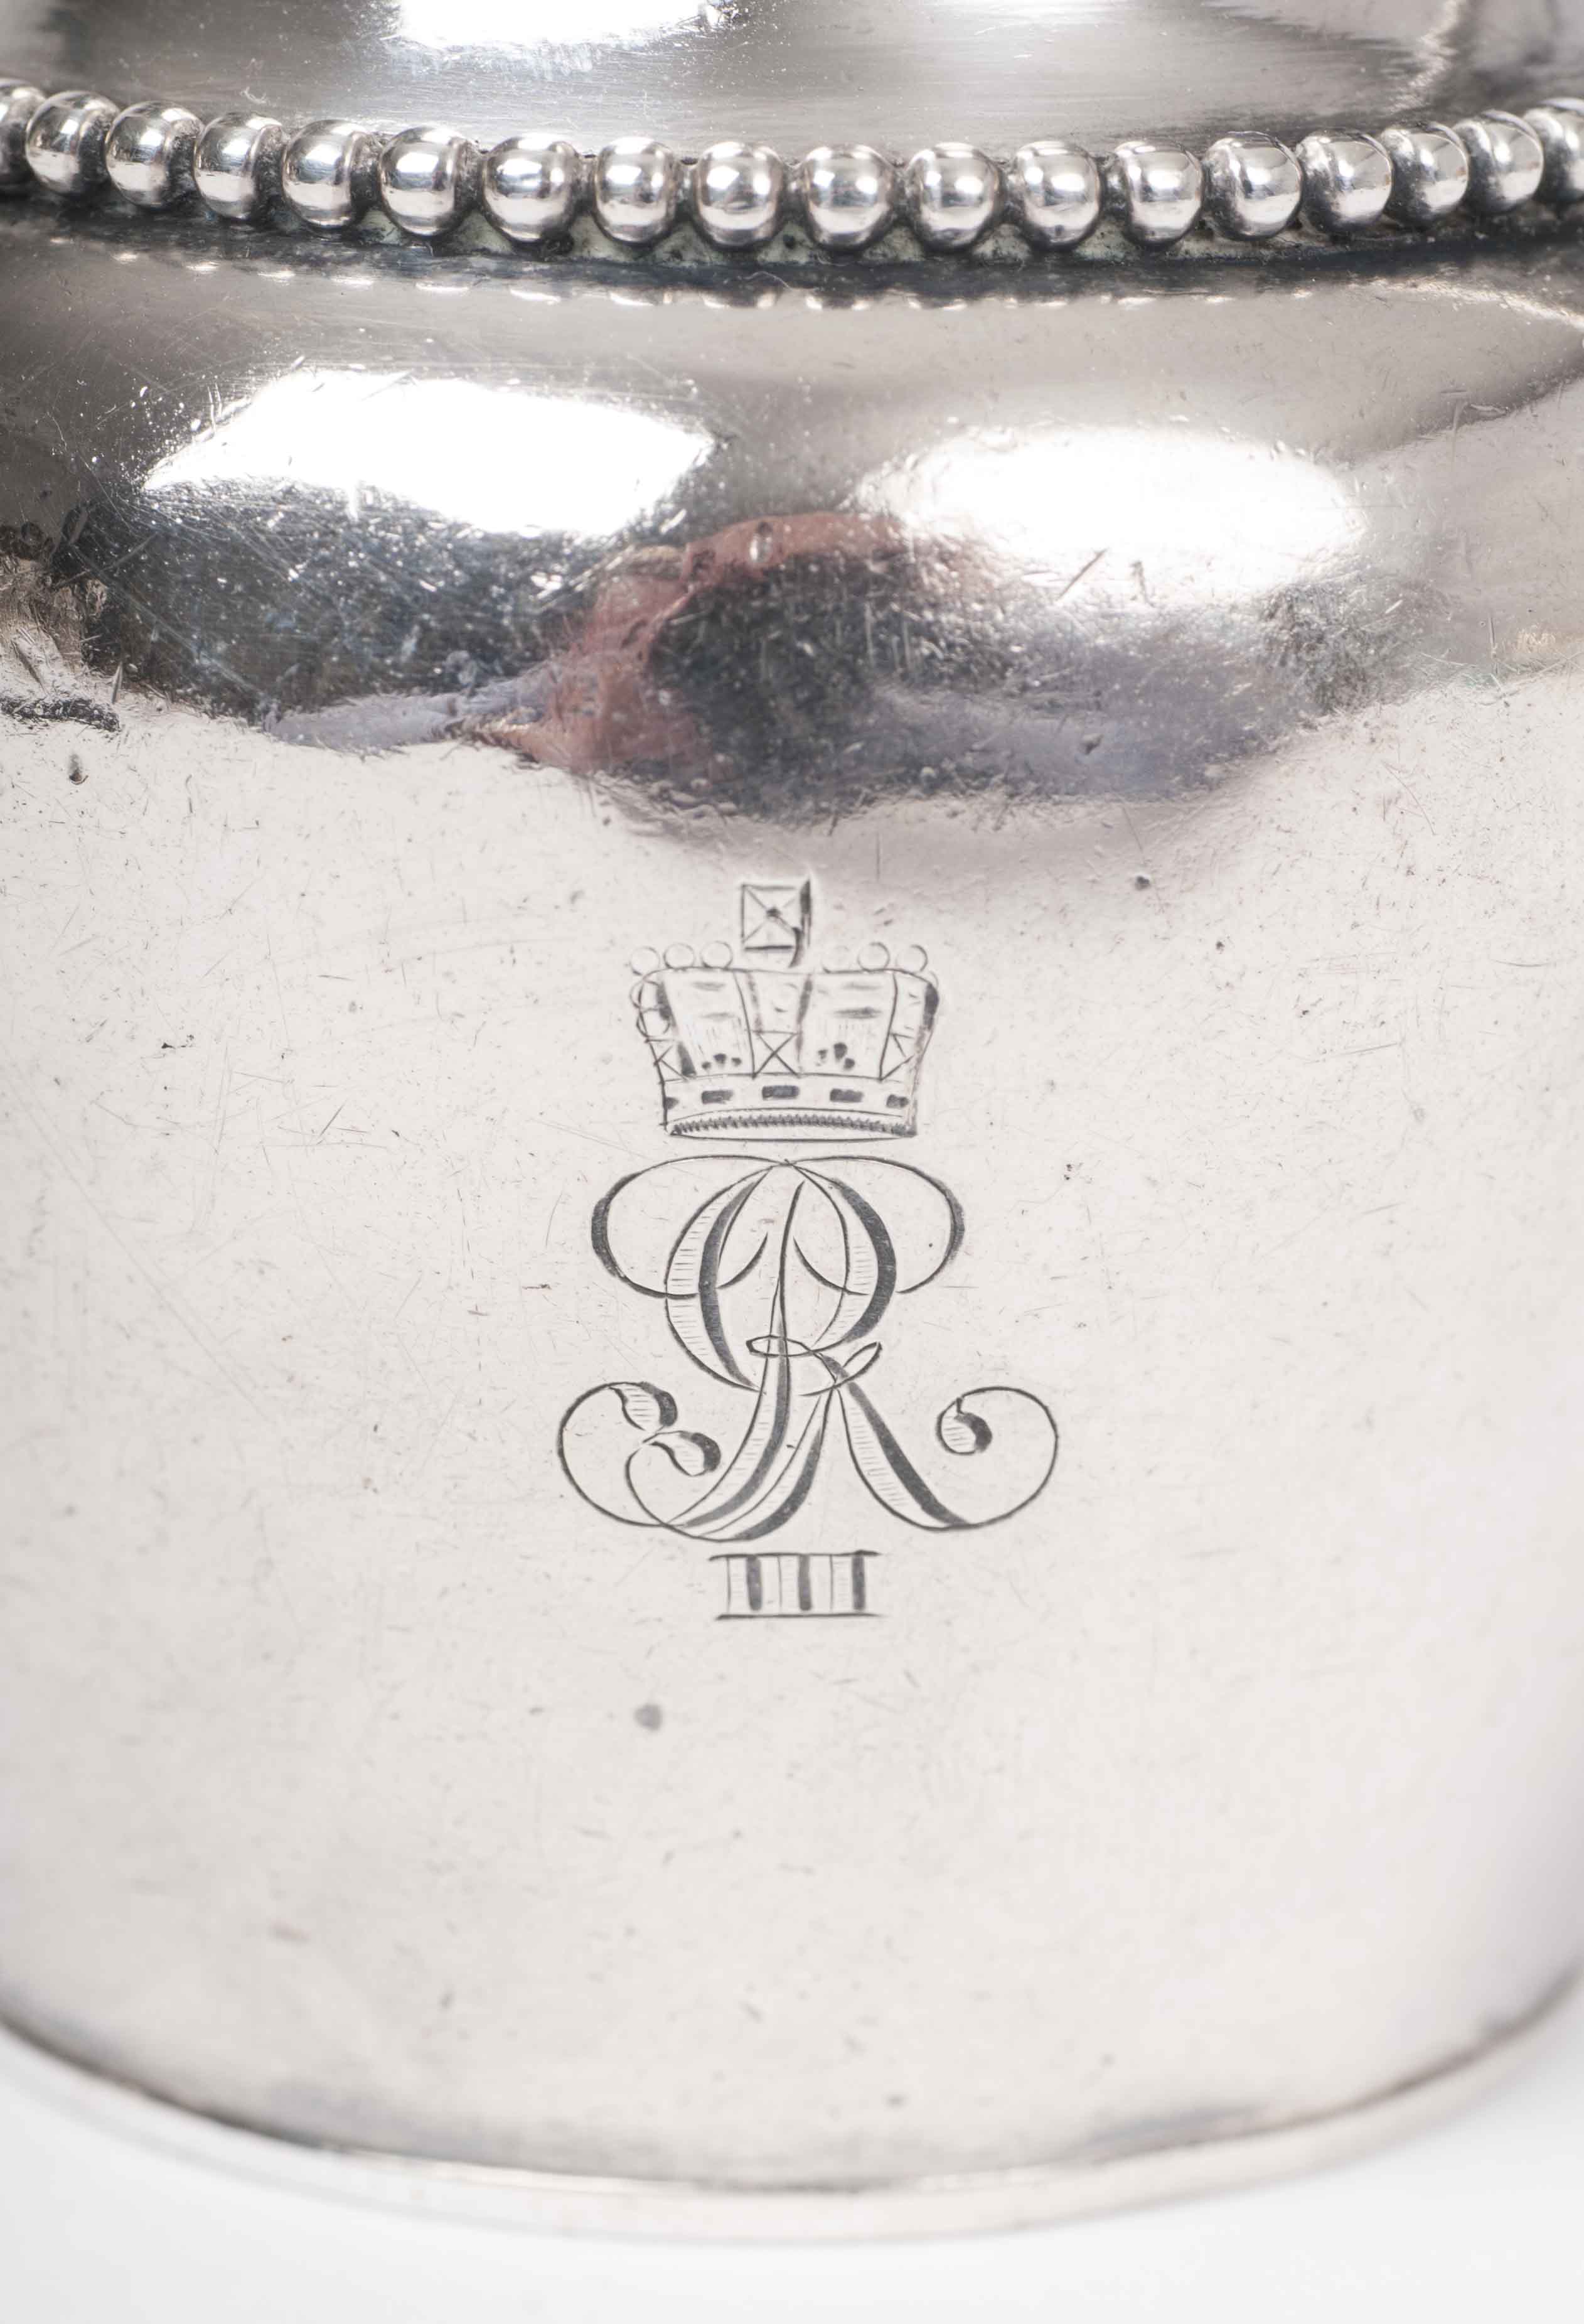 A cortly coffee pot with creamer with cypher of Georg III King of Great Britan and Ireland, Elector and later King of Hanover - image 2